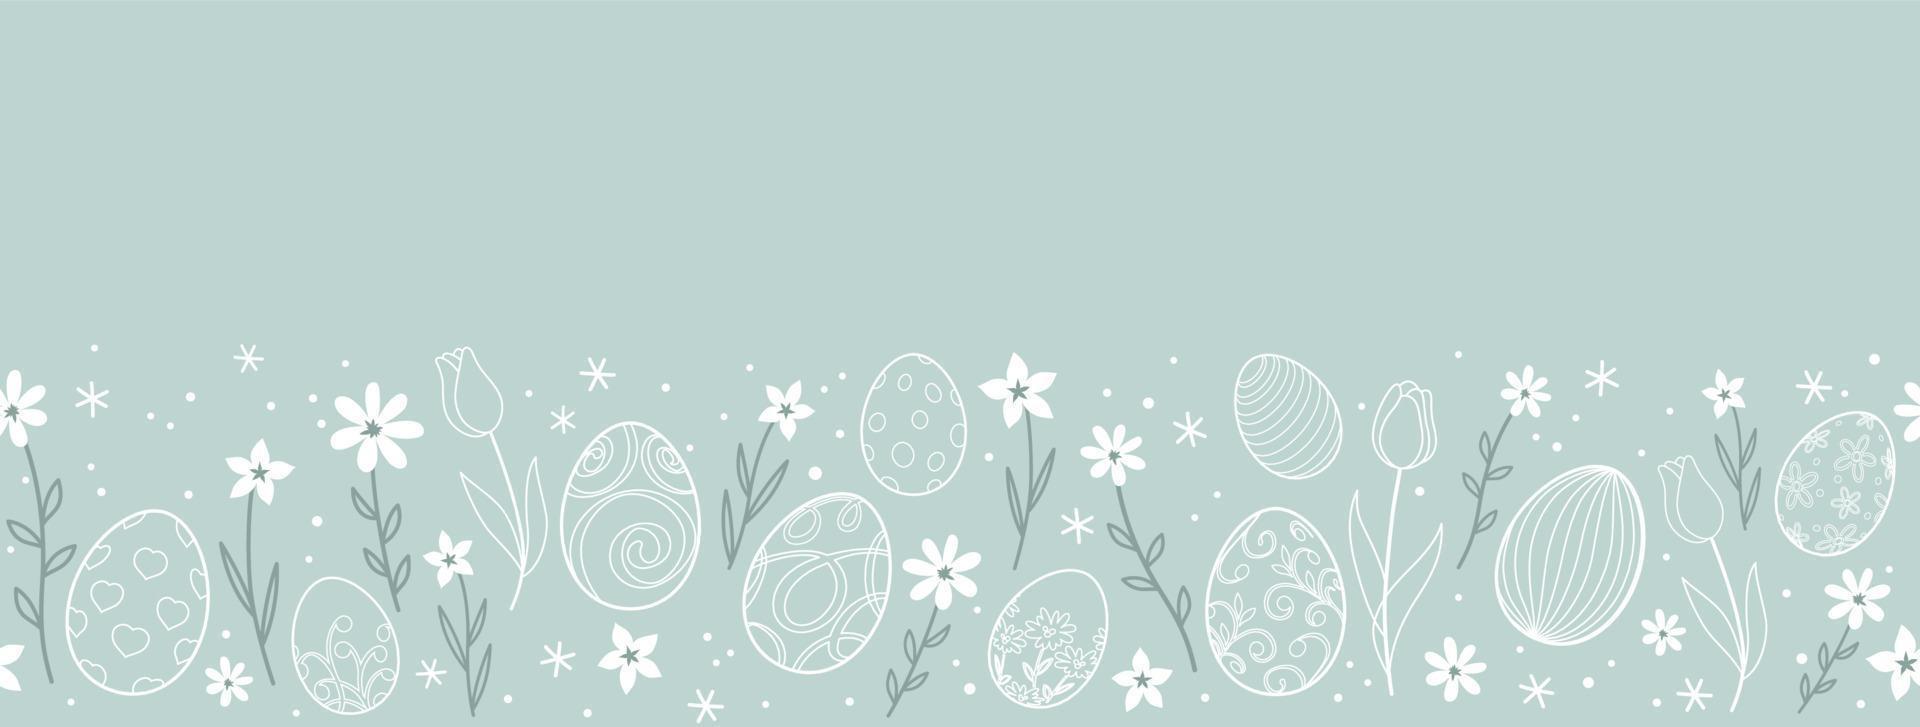 Easter Vector Background Illustration With Easter Eggs, Flowers, And A Text Space On A Blue Background. Horizontally Repeatable.